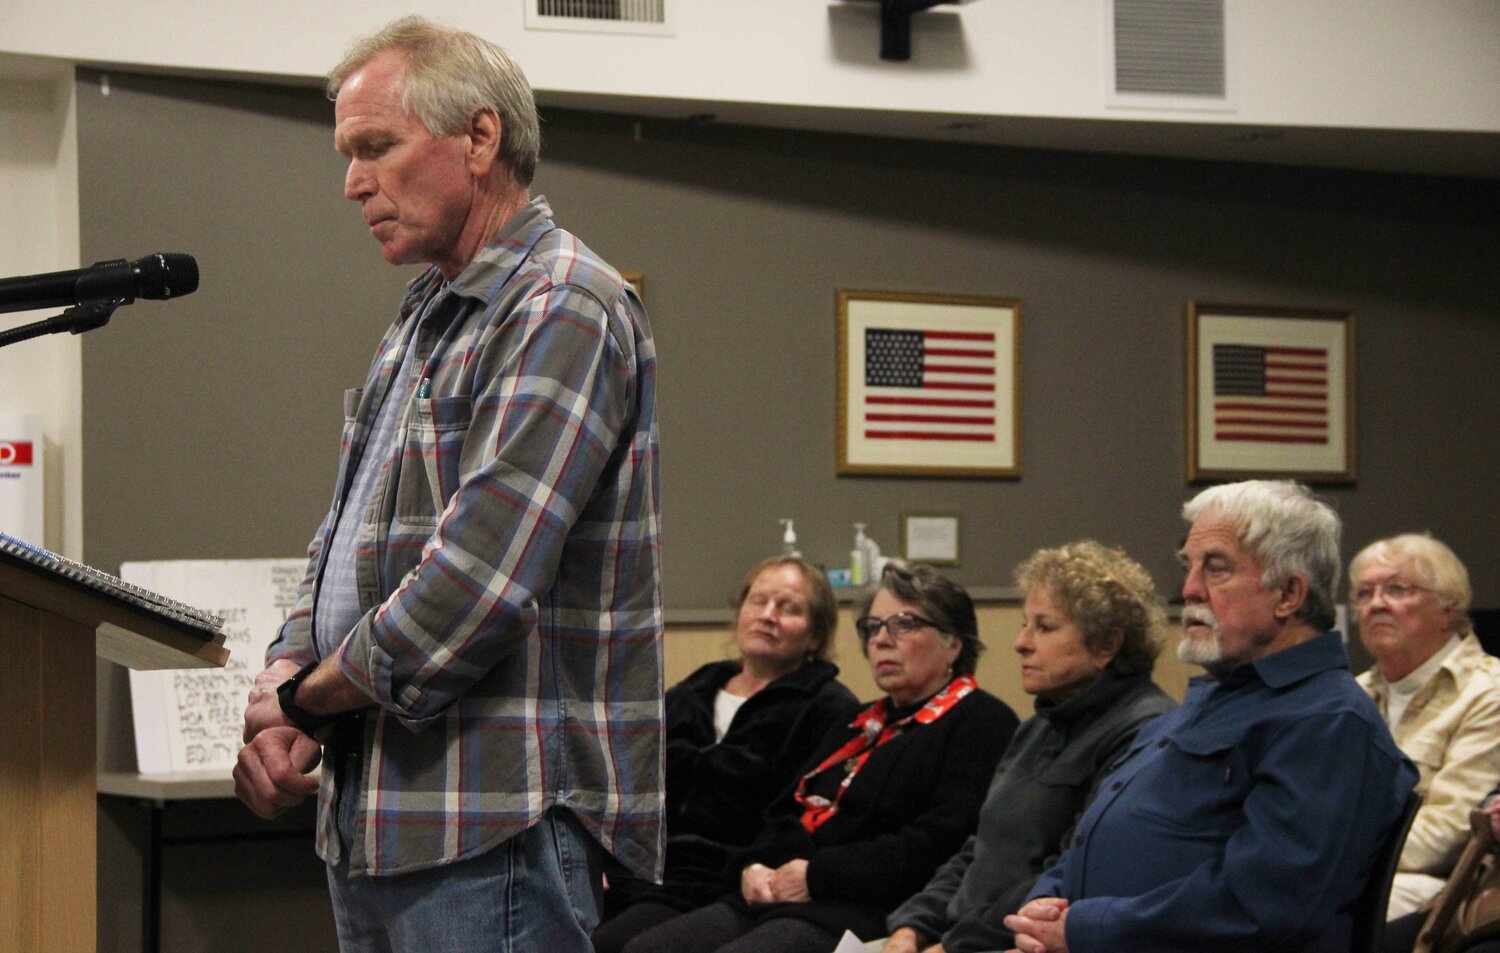 A man speaks to Blaine City Council during its October 23 meeting in council chambers. Council voted 4-0 during the meeting to approve a text amendment to the city's planned unit development code that will allow large manufactured home parks in east Blaine.